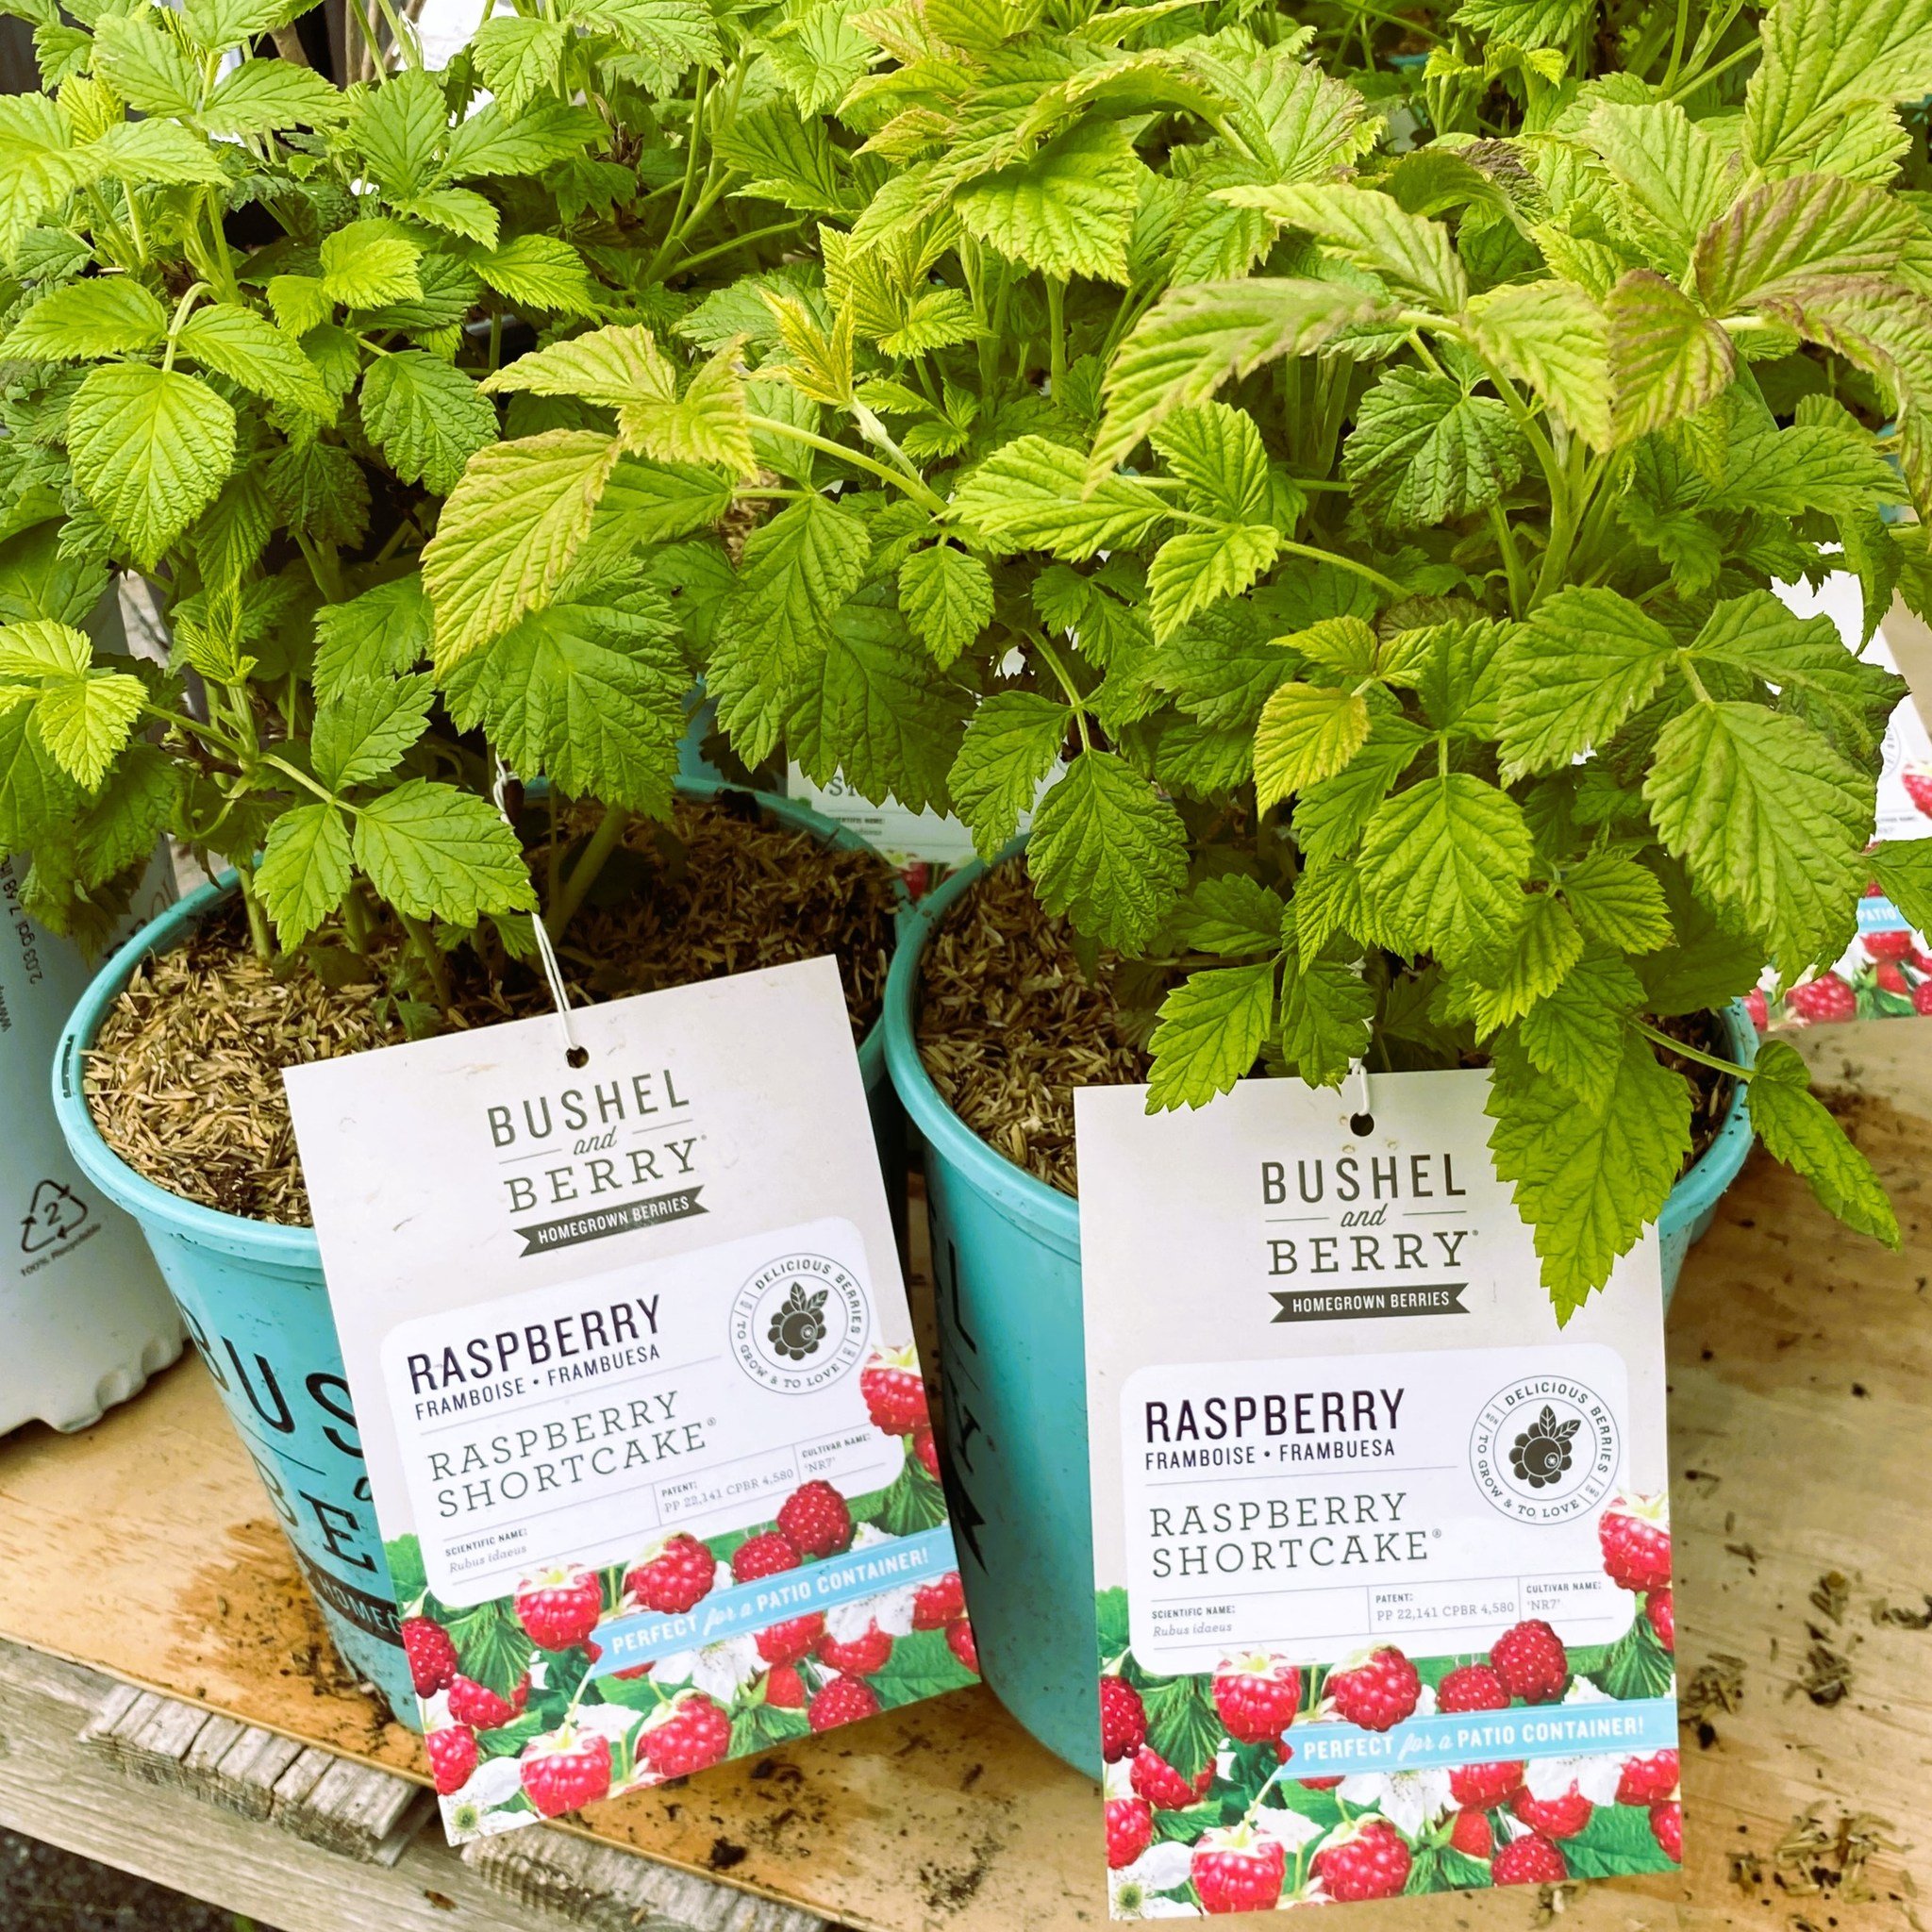 🍓 Say hello to the revolutionary Raspberry Shortcake! This thornless raspberry plant is perfect for patio pots or your garden. With its compact and rounded growth, it&rsquo;s great for kids and adults alike. No need for staking or big garden spaces 